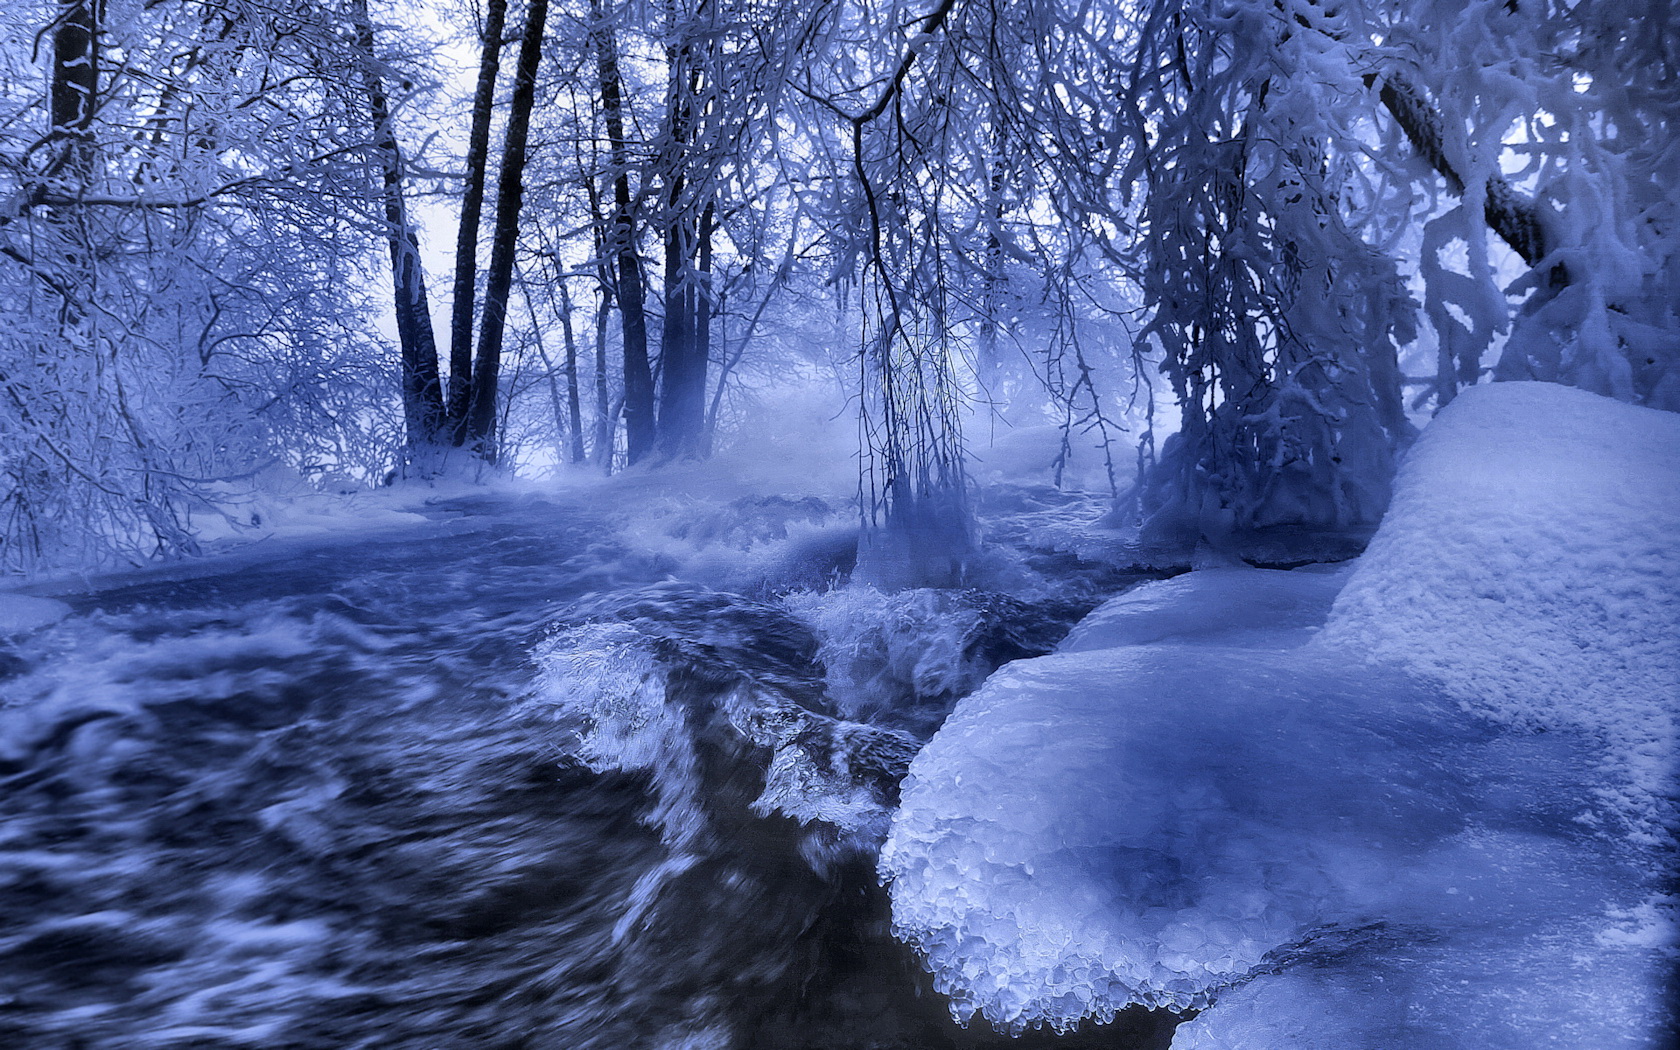 Previous, Archive - Winter wallpapers - Forest River wallpaper